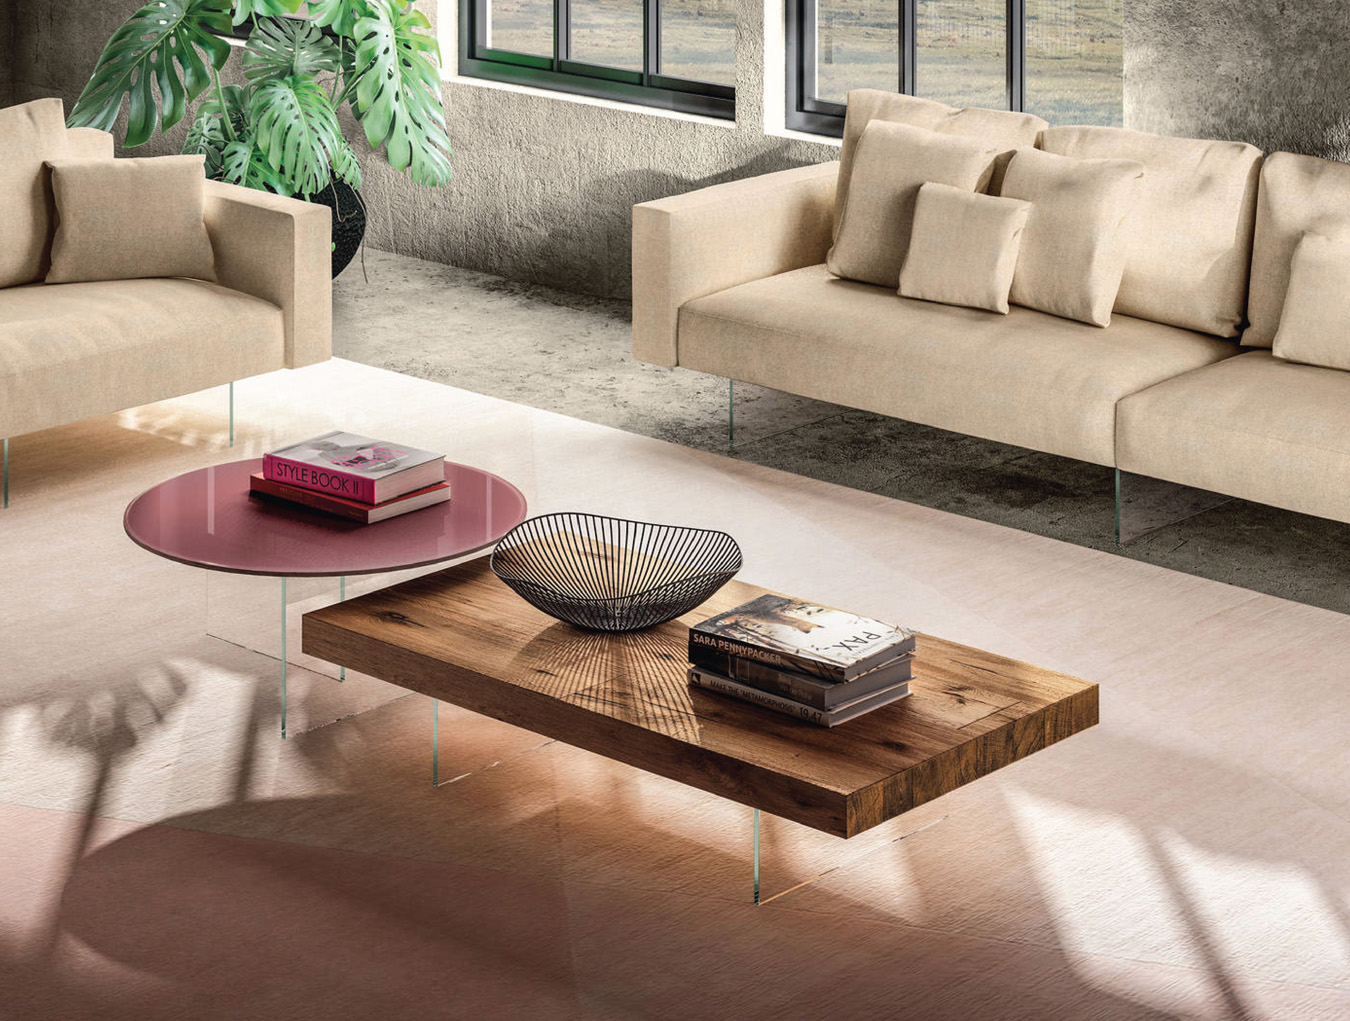 Lago Cat Living Room Coffee Table Air Coffee Table